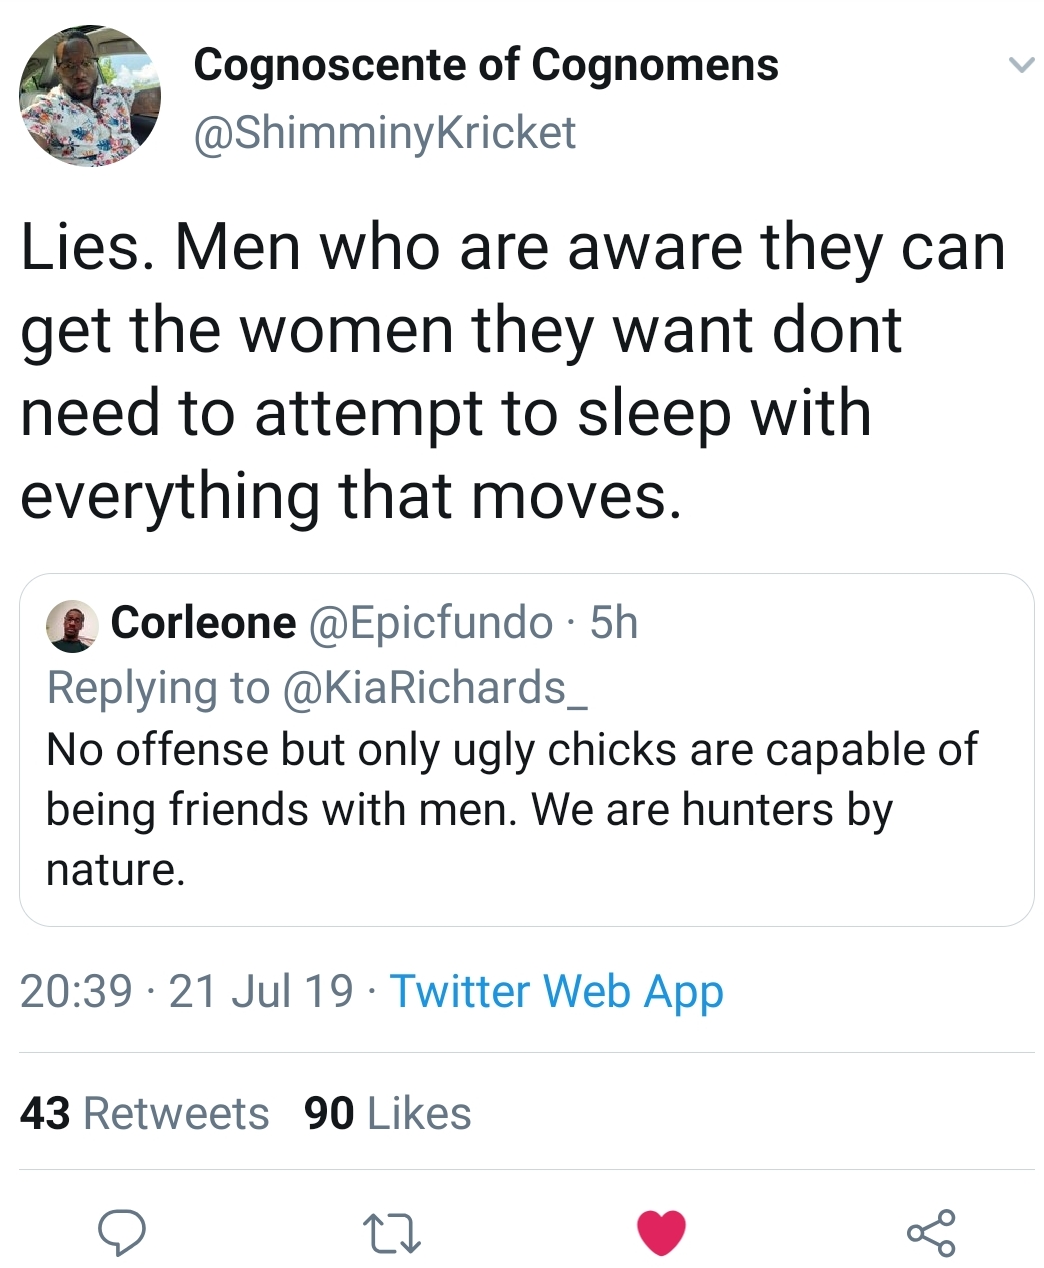 missing piece meets the big - Cognoscente of Cognomens Kricket Lies. Men who are aware they can get the women they want dont need to attempt to sleep with everything that moves. no offense but only ugly chicks are capable of being fr